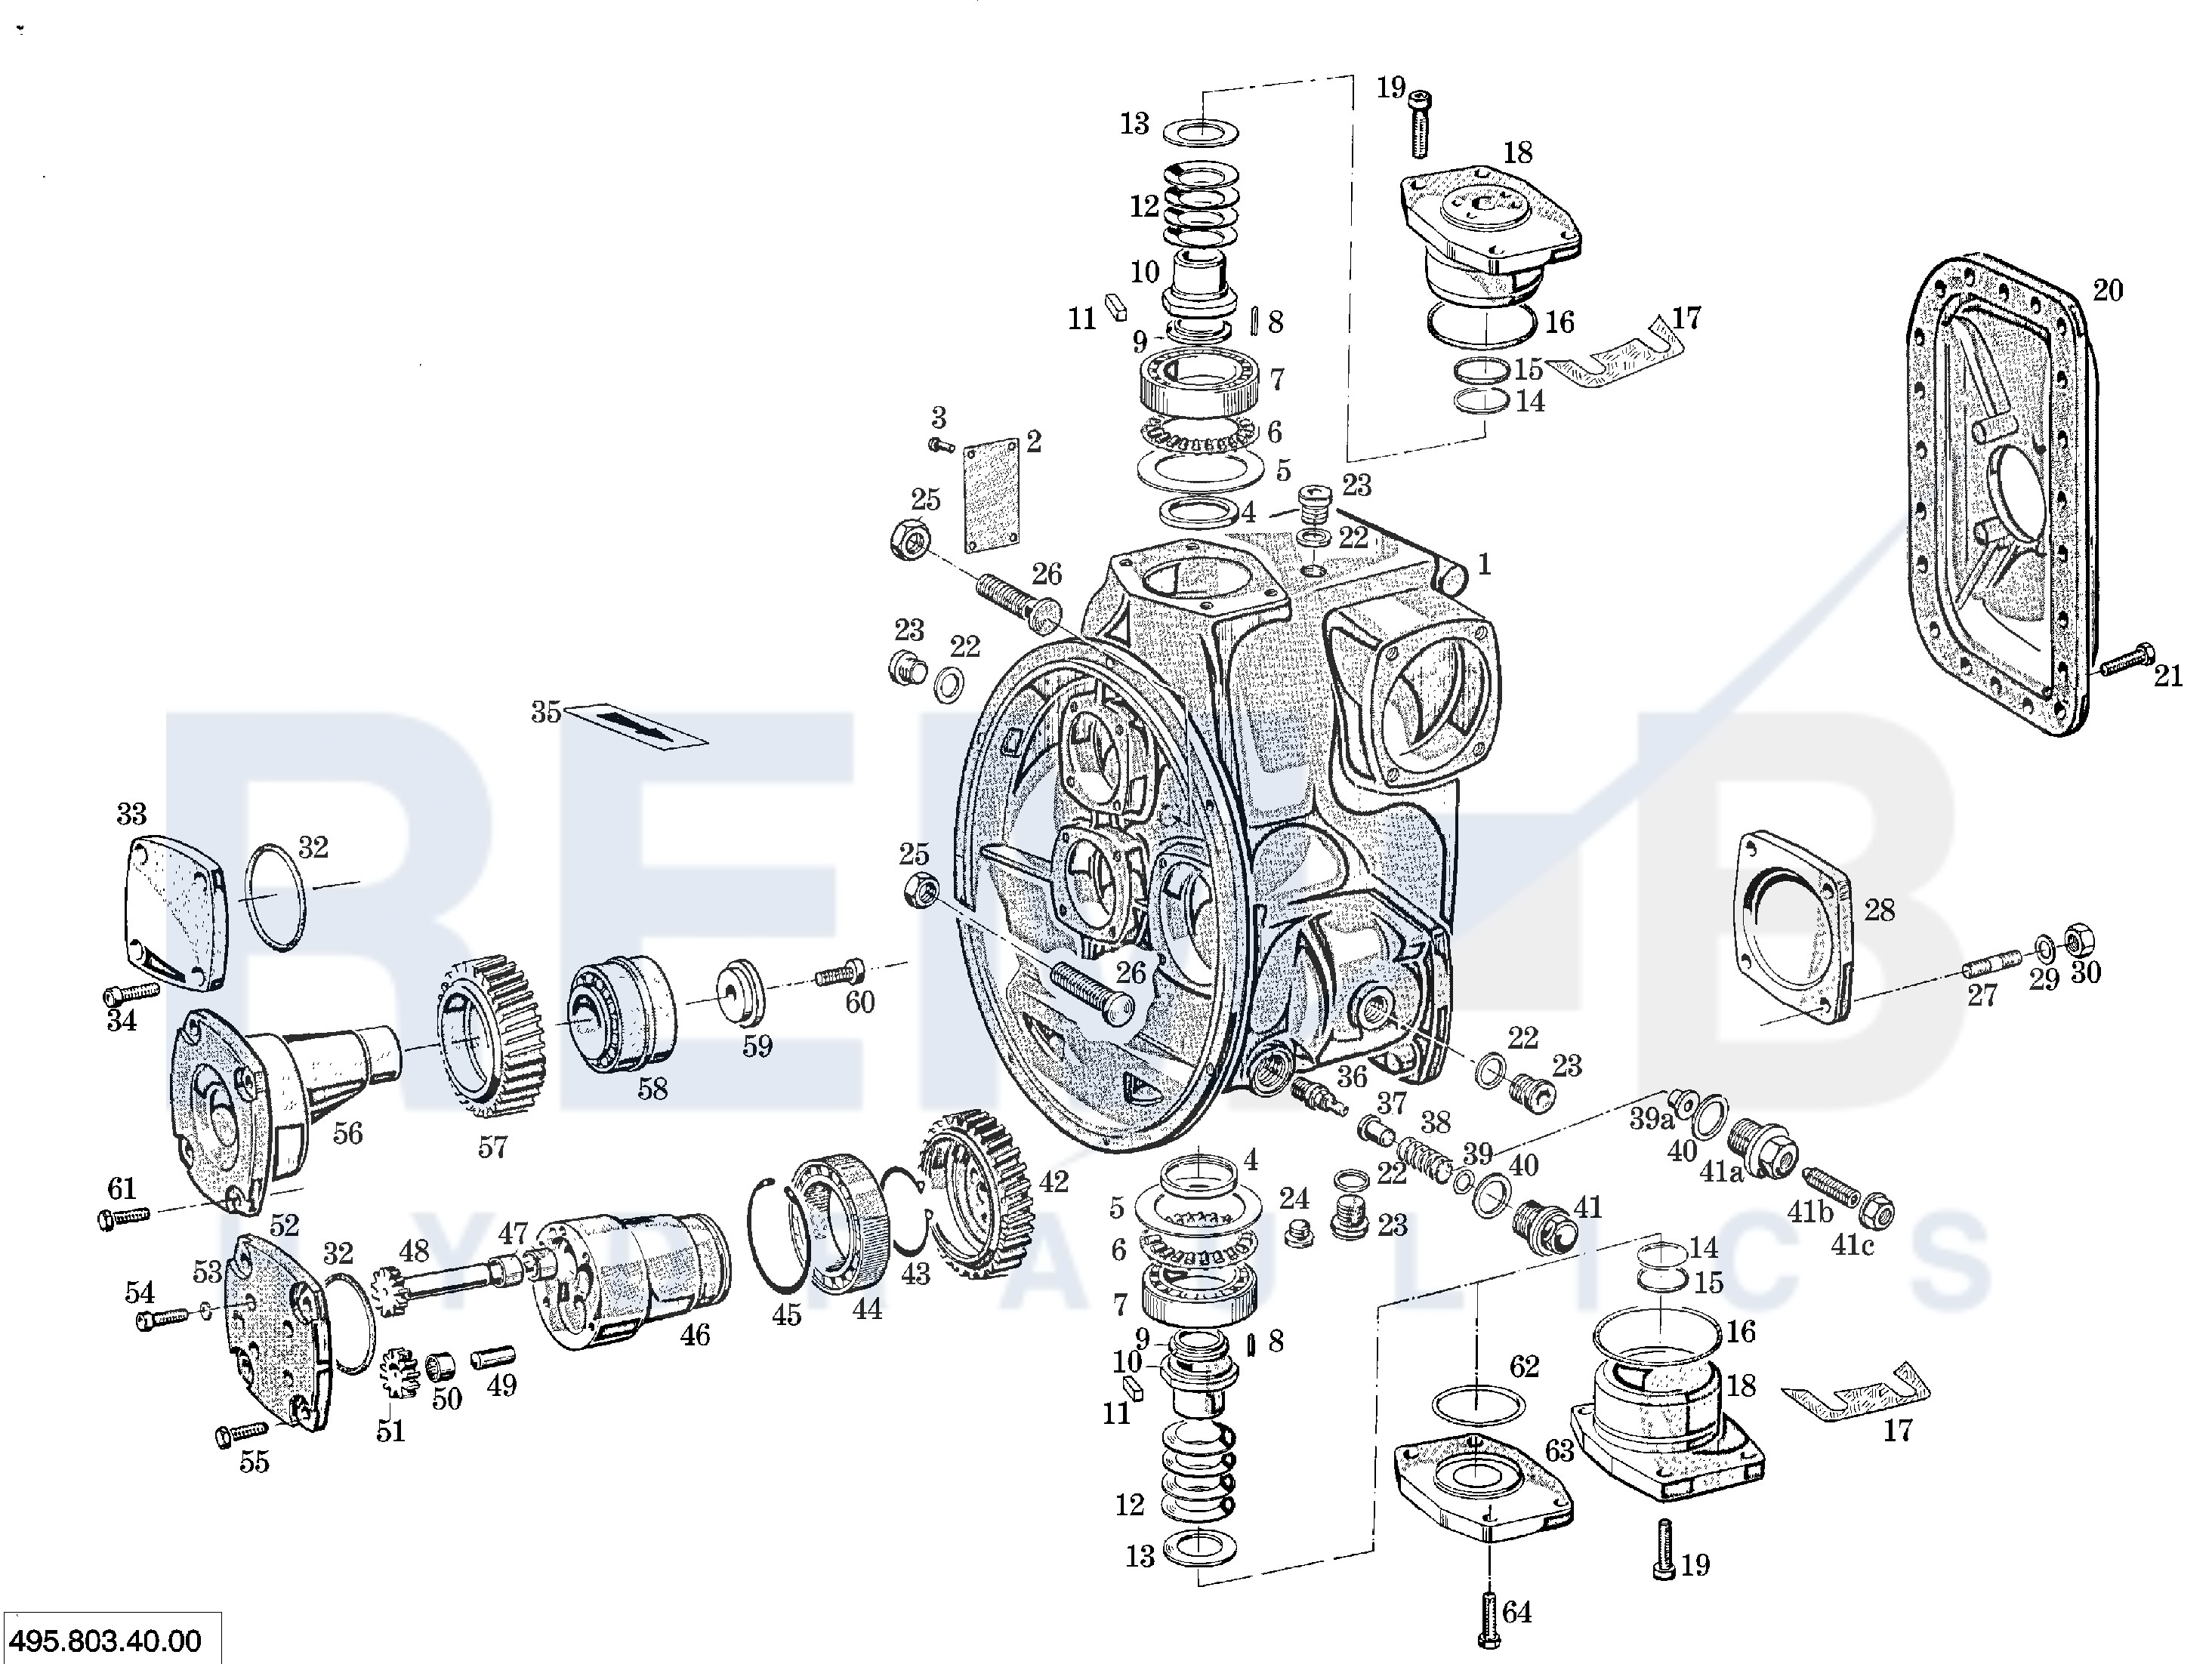 HOUSING, FLANGE, GEAR PUMP AND COVER